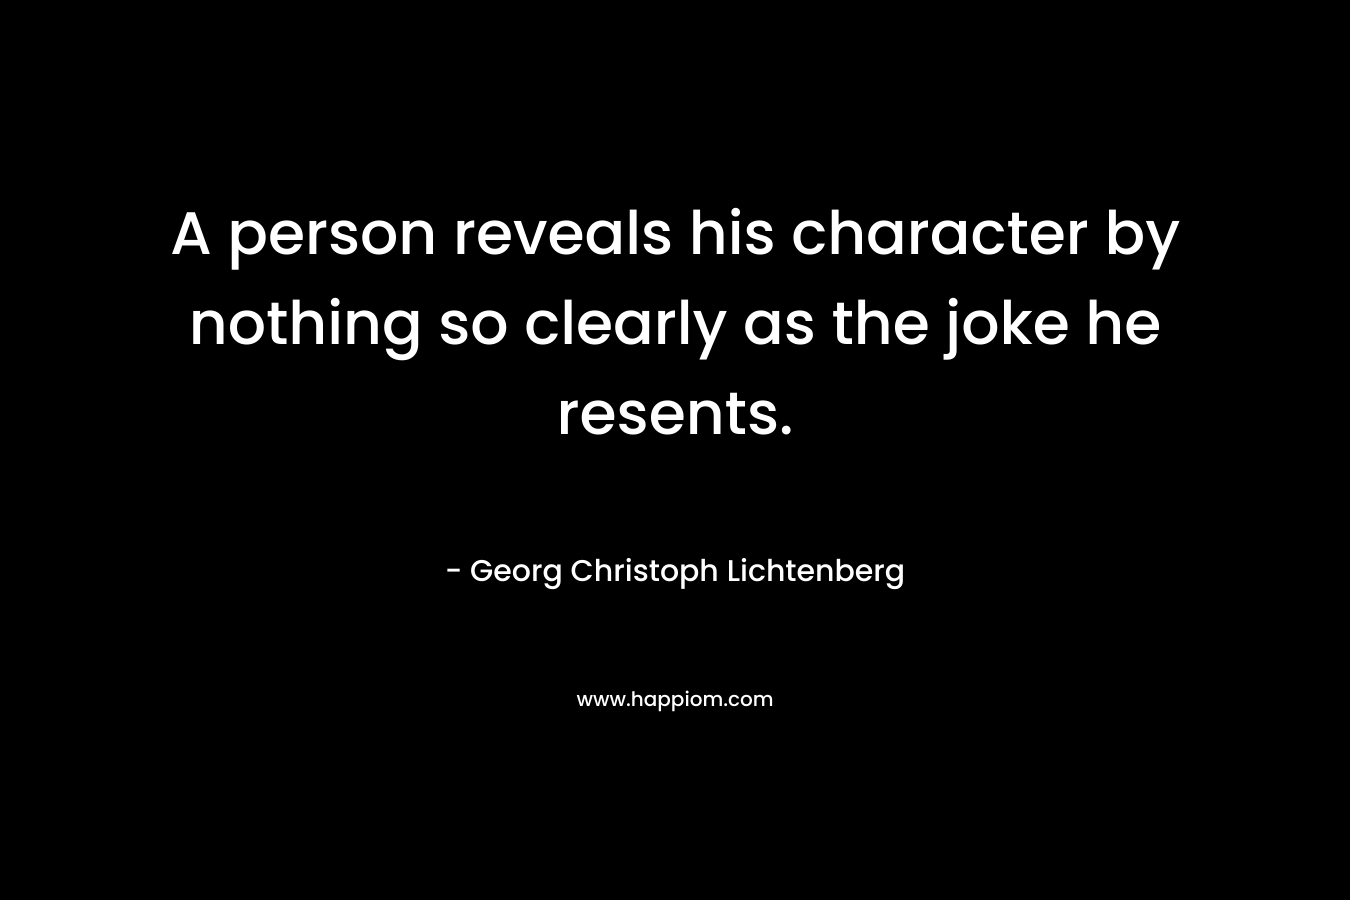 A person reveals his character by nothing so clearly as the joke he resents. – Georg Christoph Lichtenberg